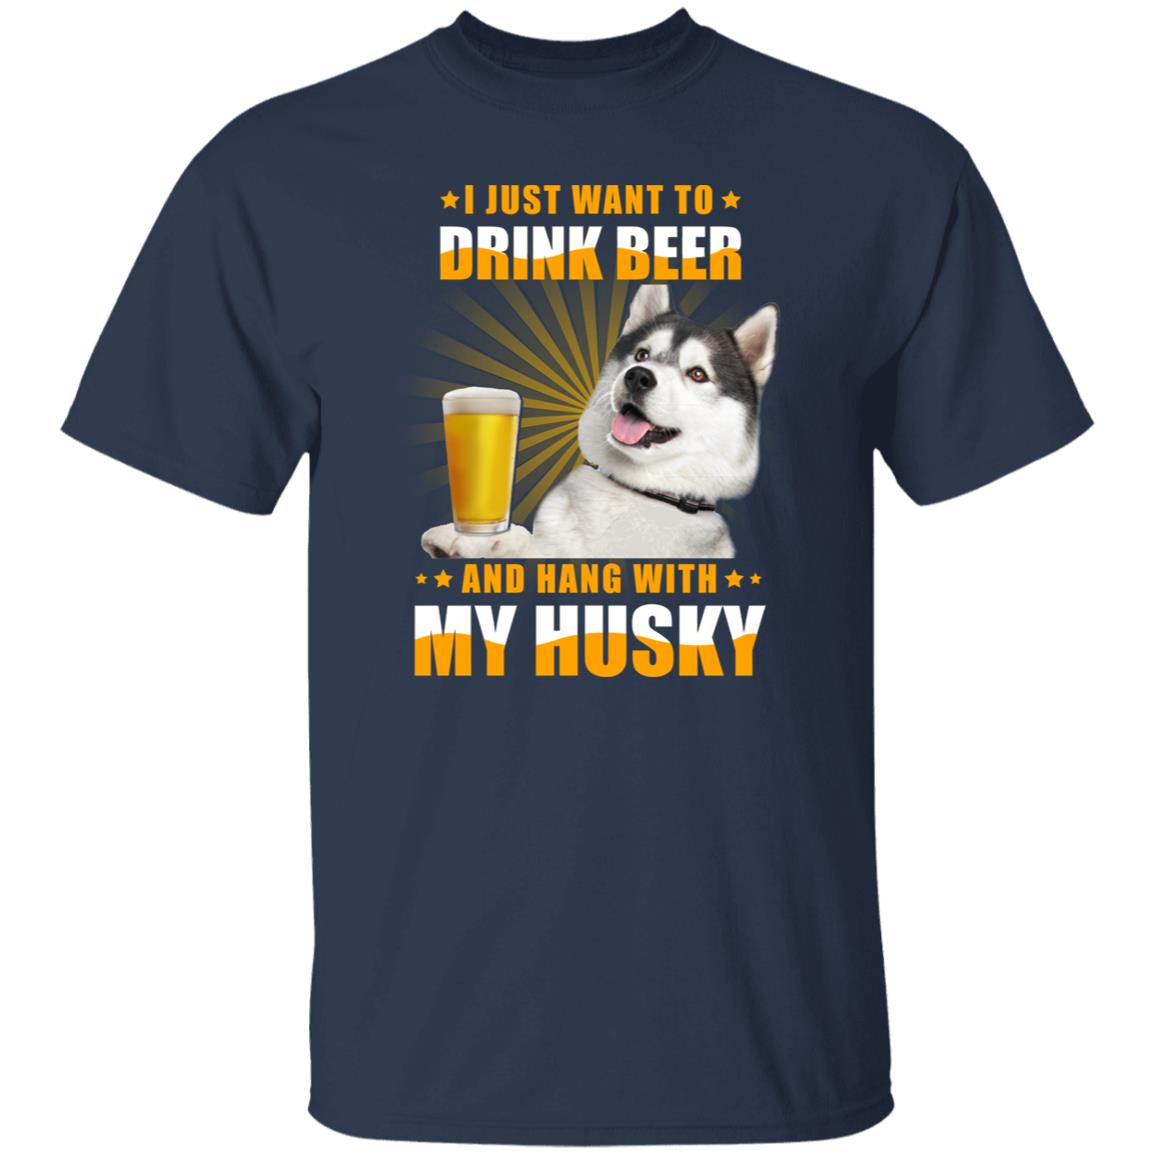 Husky owner T-Shirt gift I just want to drink beer Dog mom Unisex tee Black Navy Dark Heather-Navy-Family-Gift-Planet